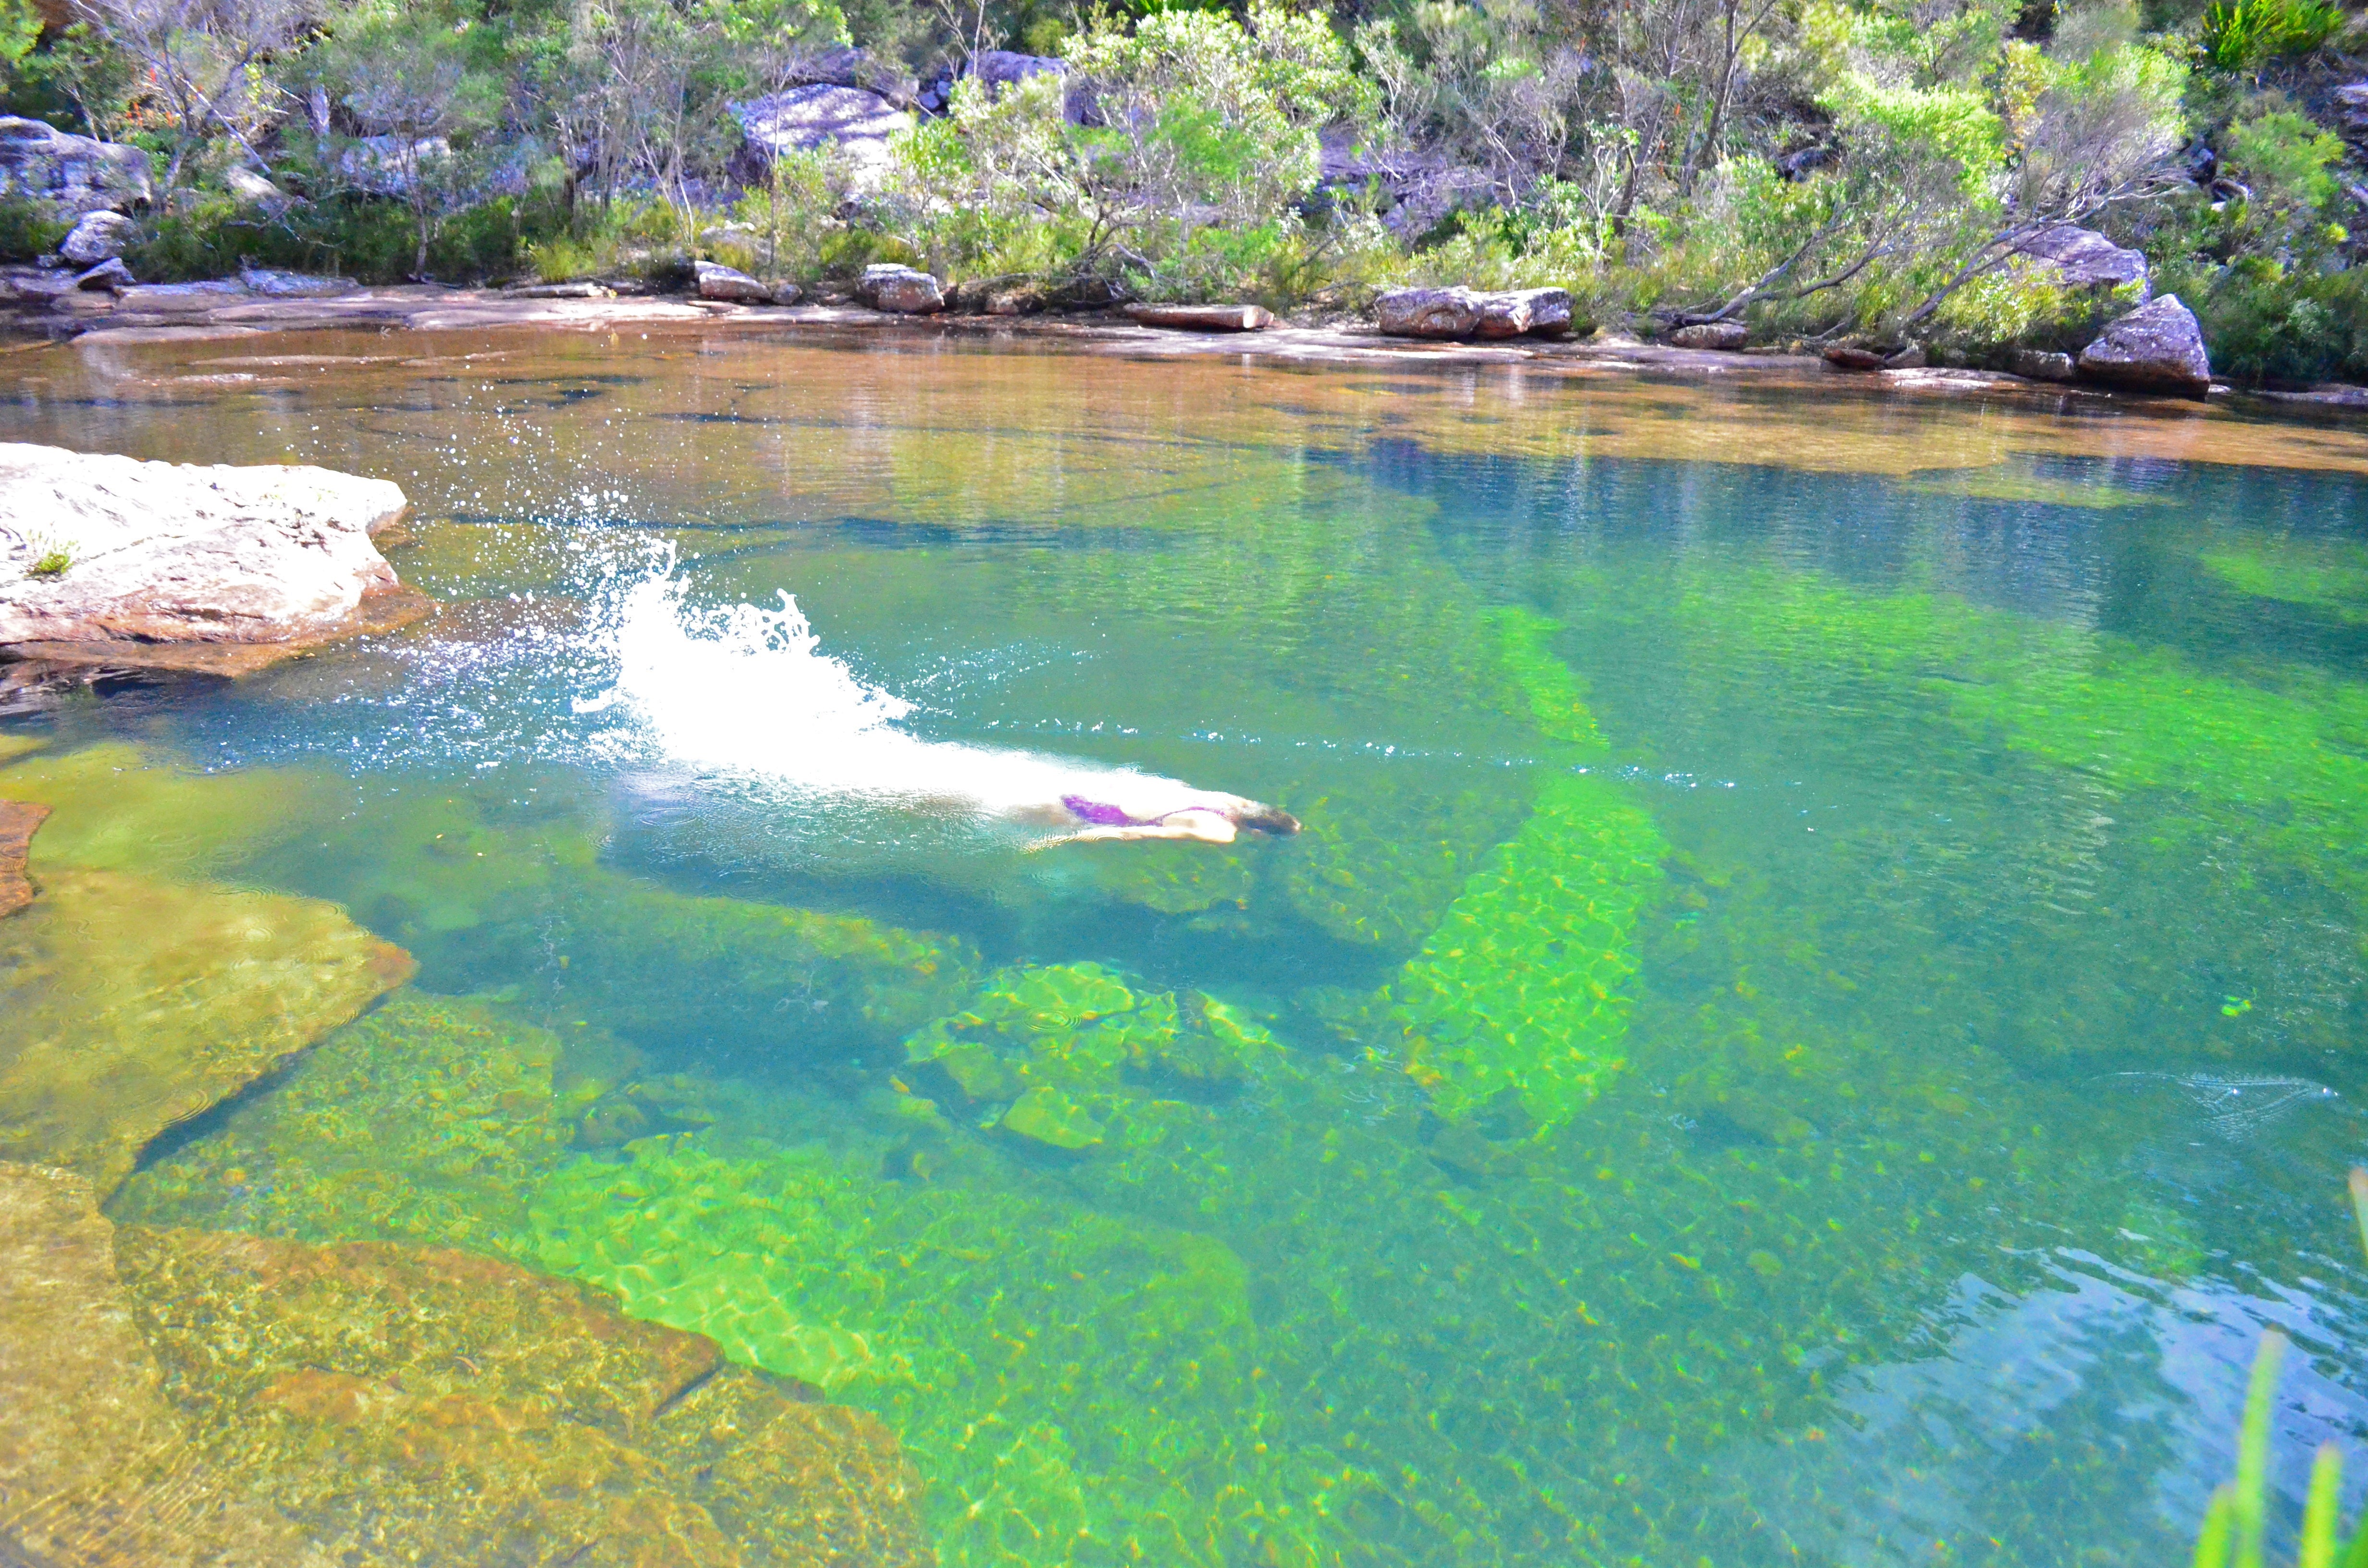 The ten most spectacular swimming hole locations in Sydney, Australia.